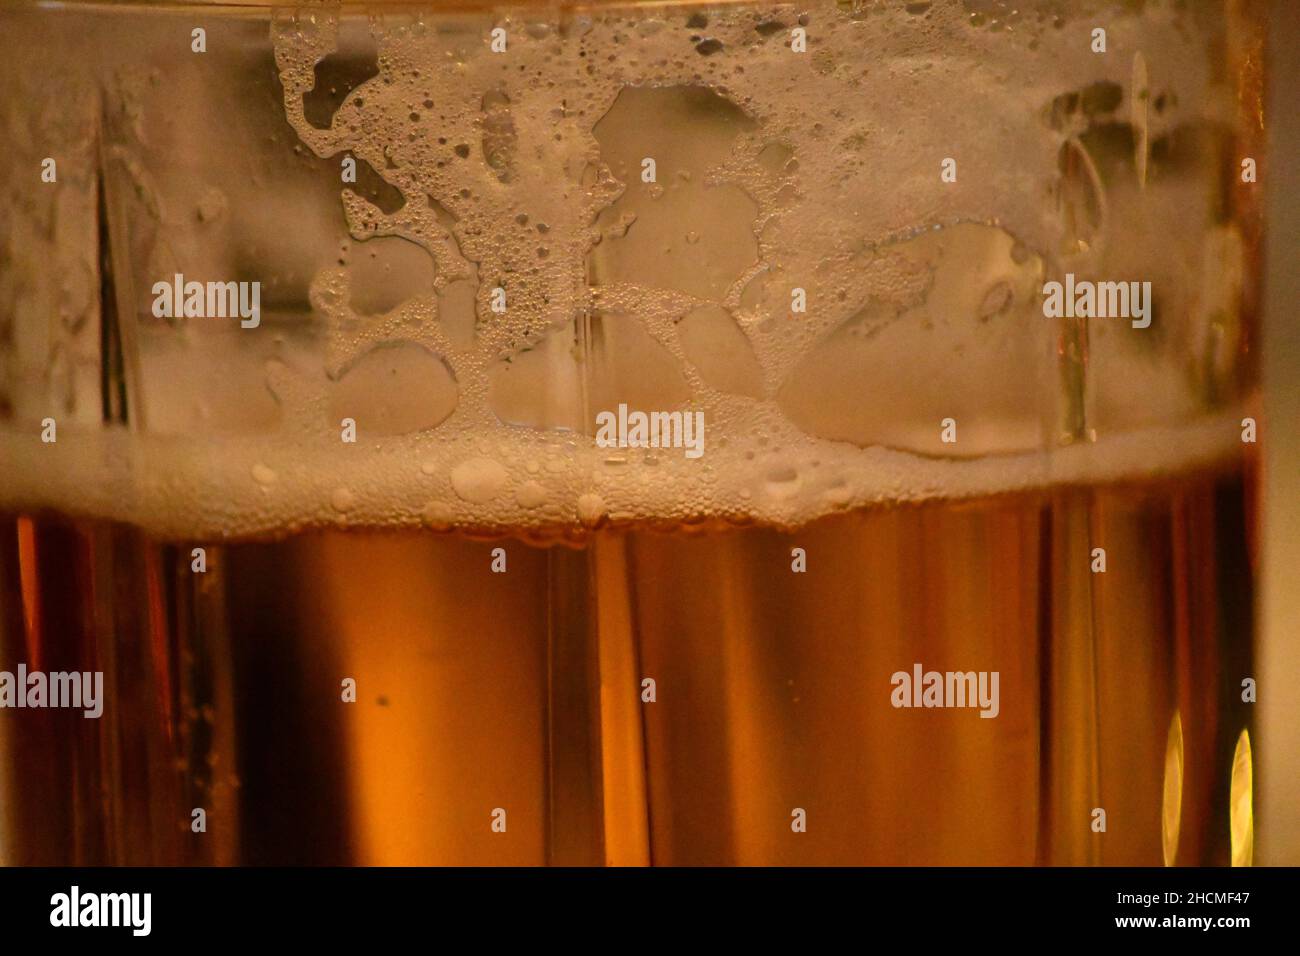 A glass of real ale showing the reduction of froth as the ale is drunk Stock Photo